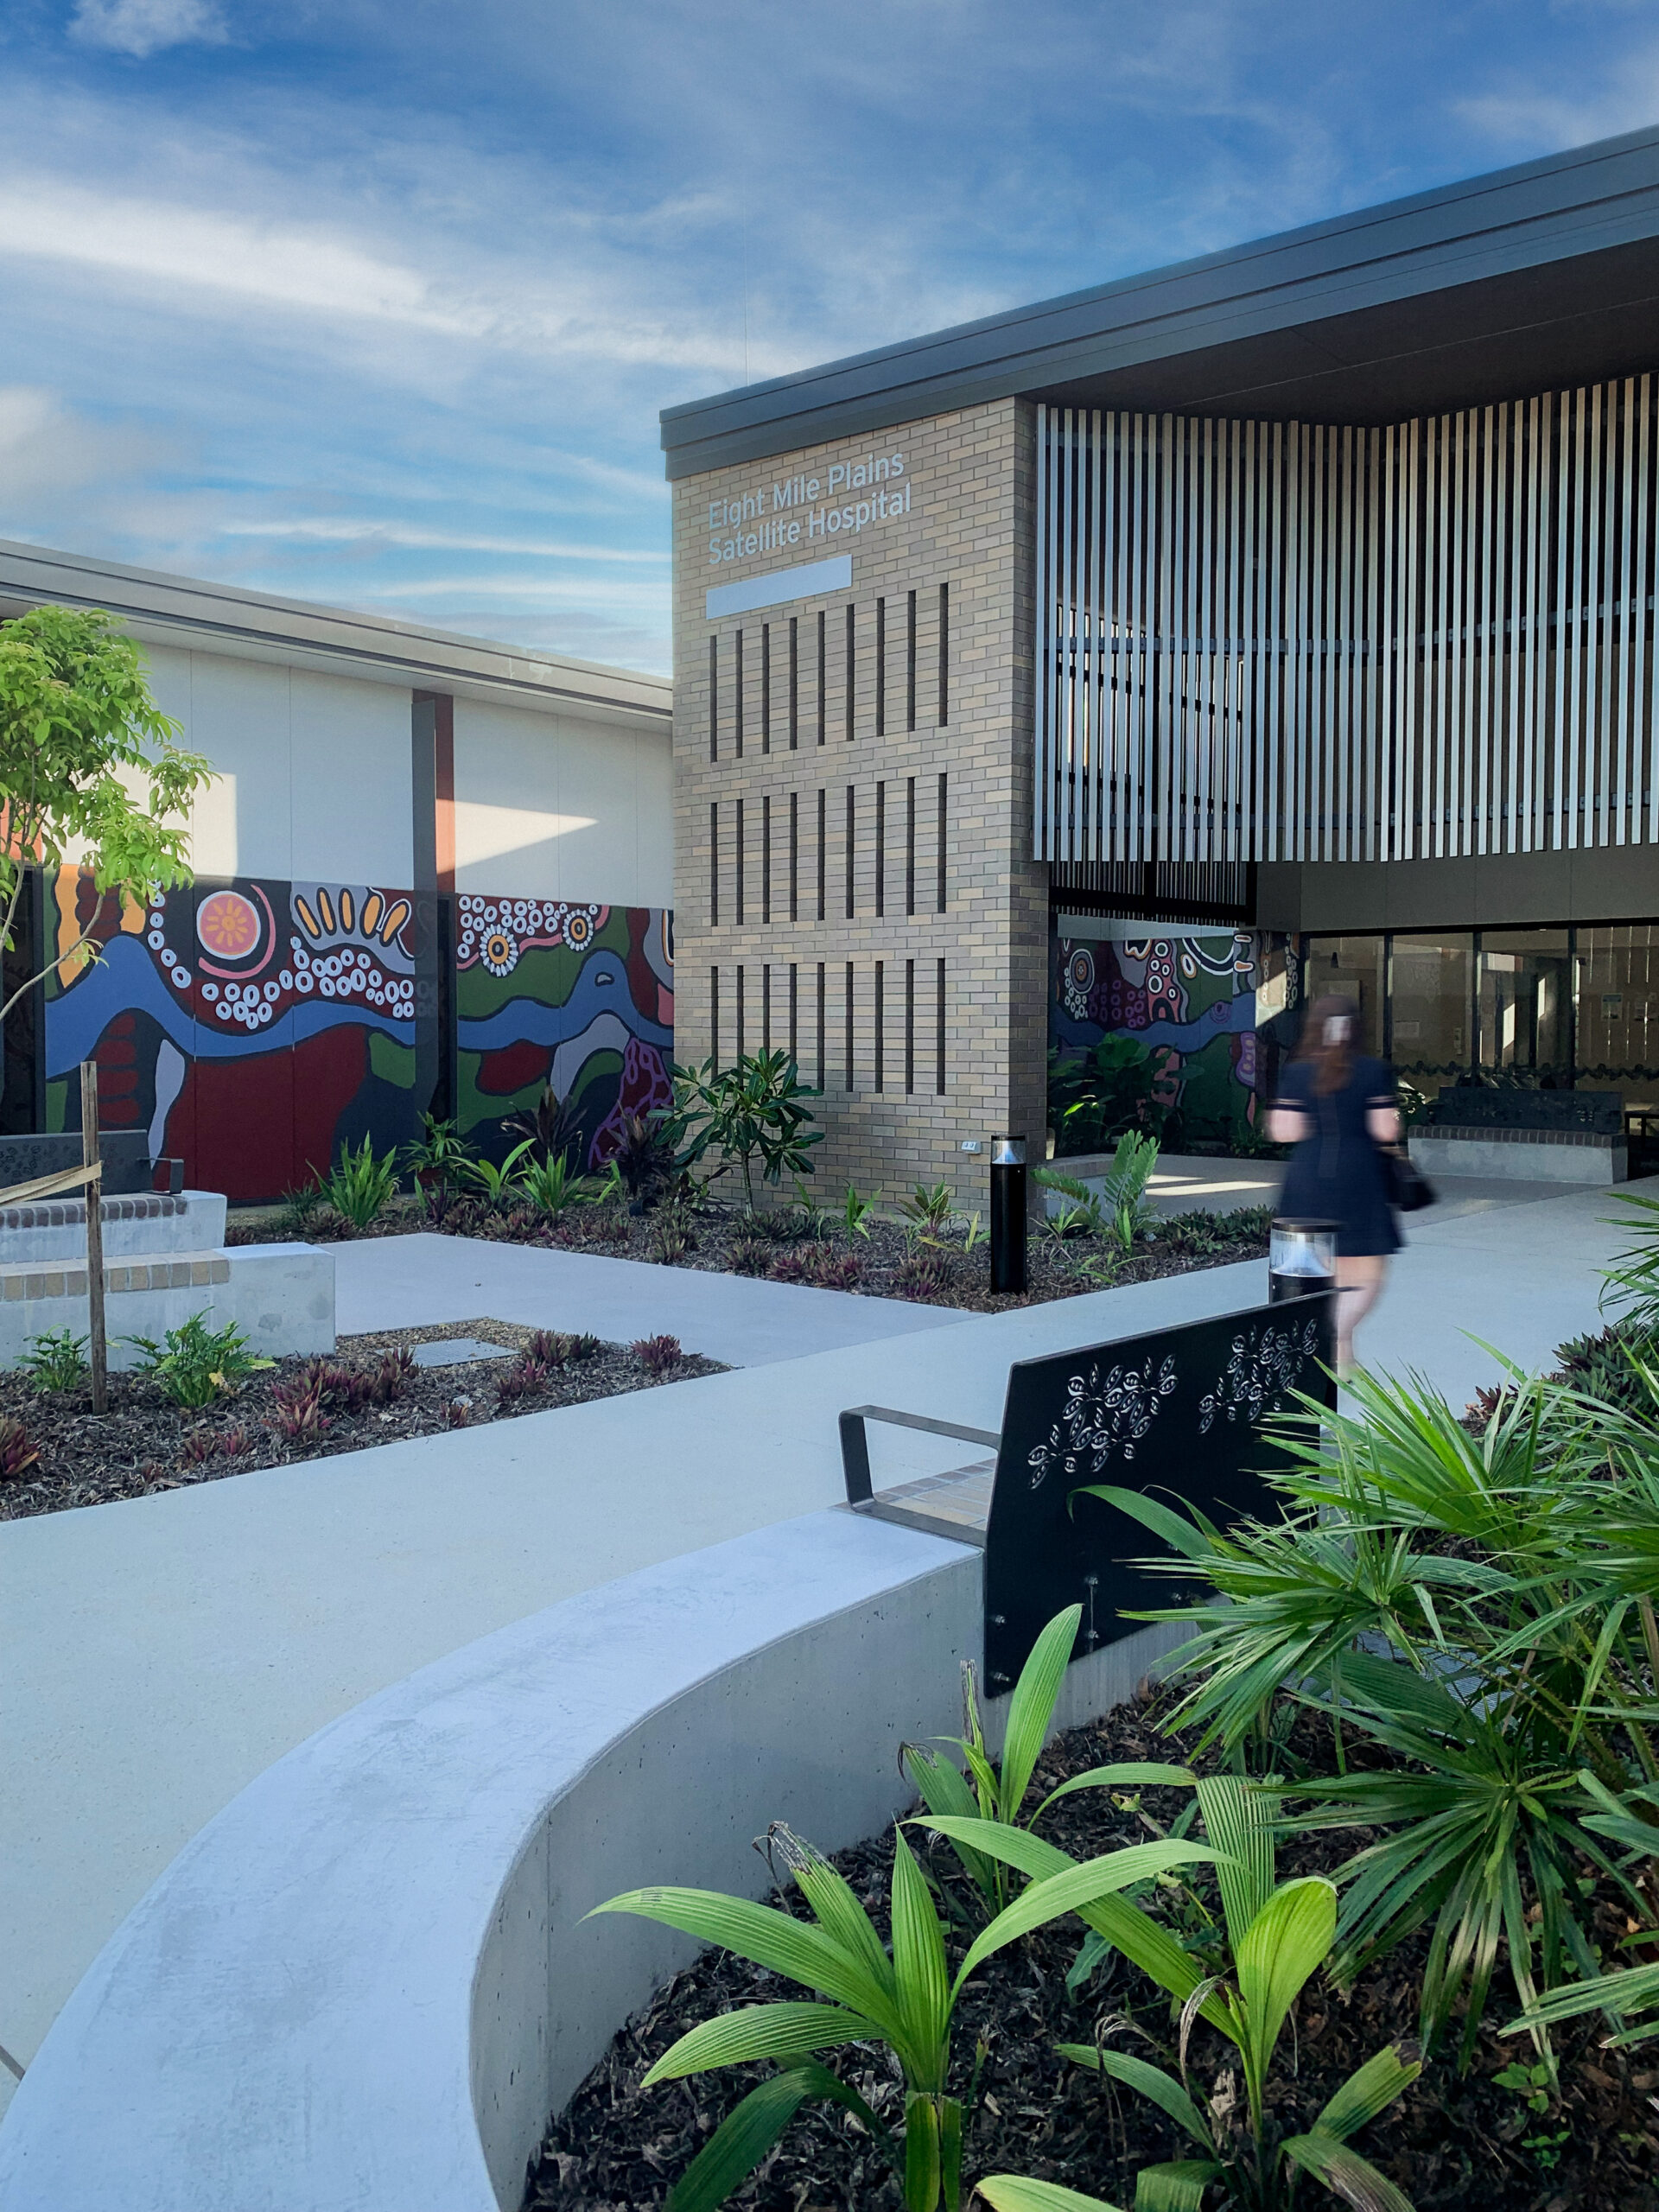 Female walking on a path towards the newly completed Eight Mile Plains Satellite Hospital, with green gardens and a Frist Nations artwork by Ailsa Walsh is painted on a wall mural.